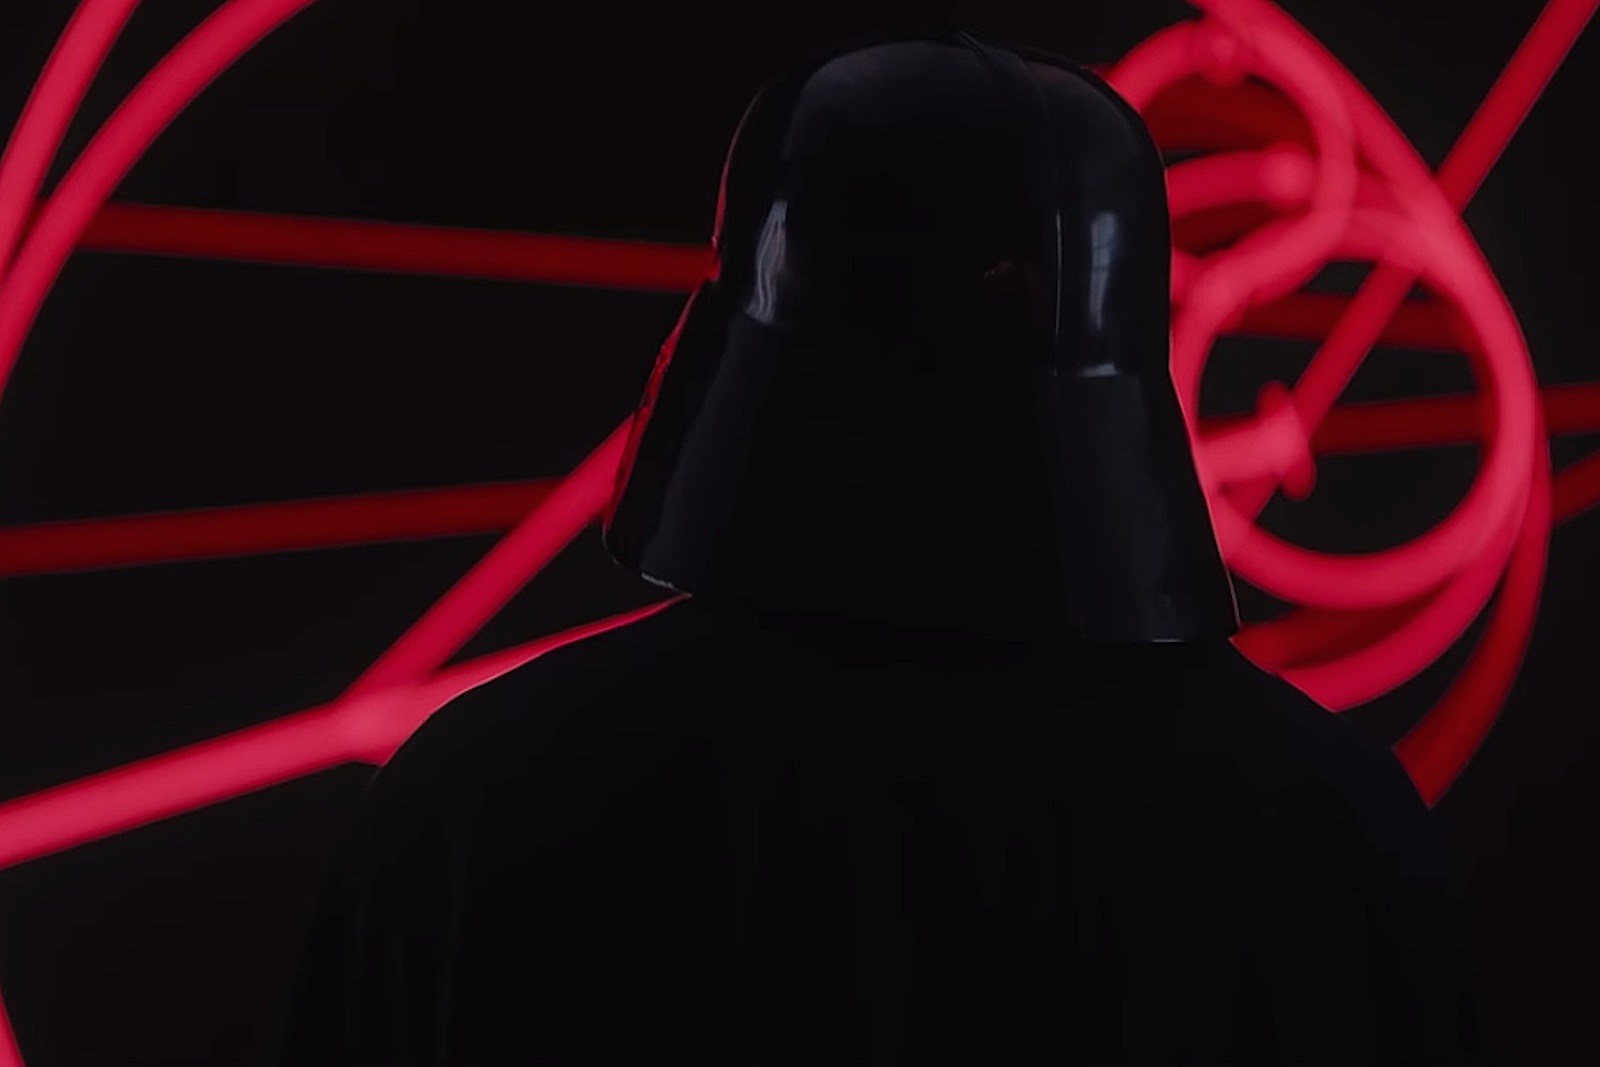 Obi-Wan show reveals return of Darth Vader in first-look photo